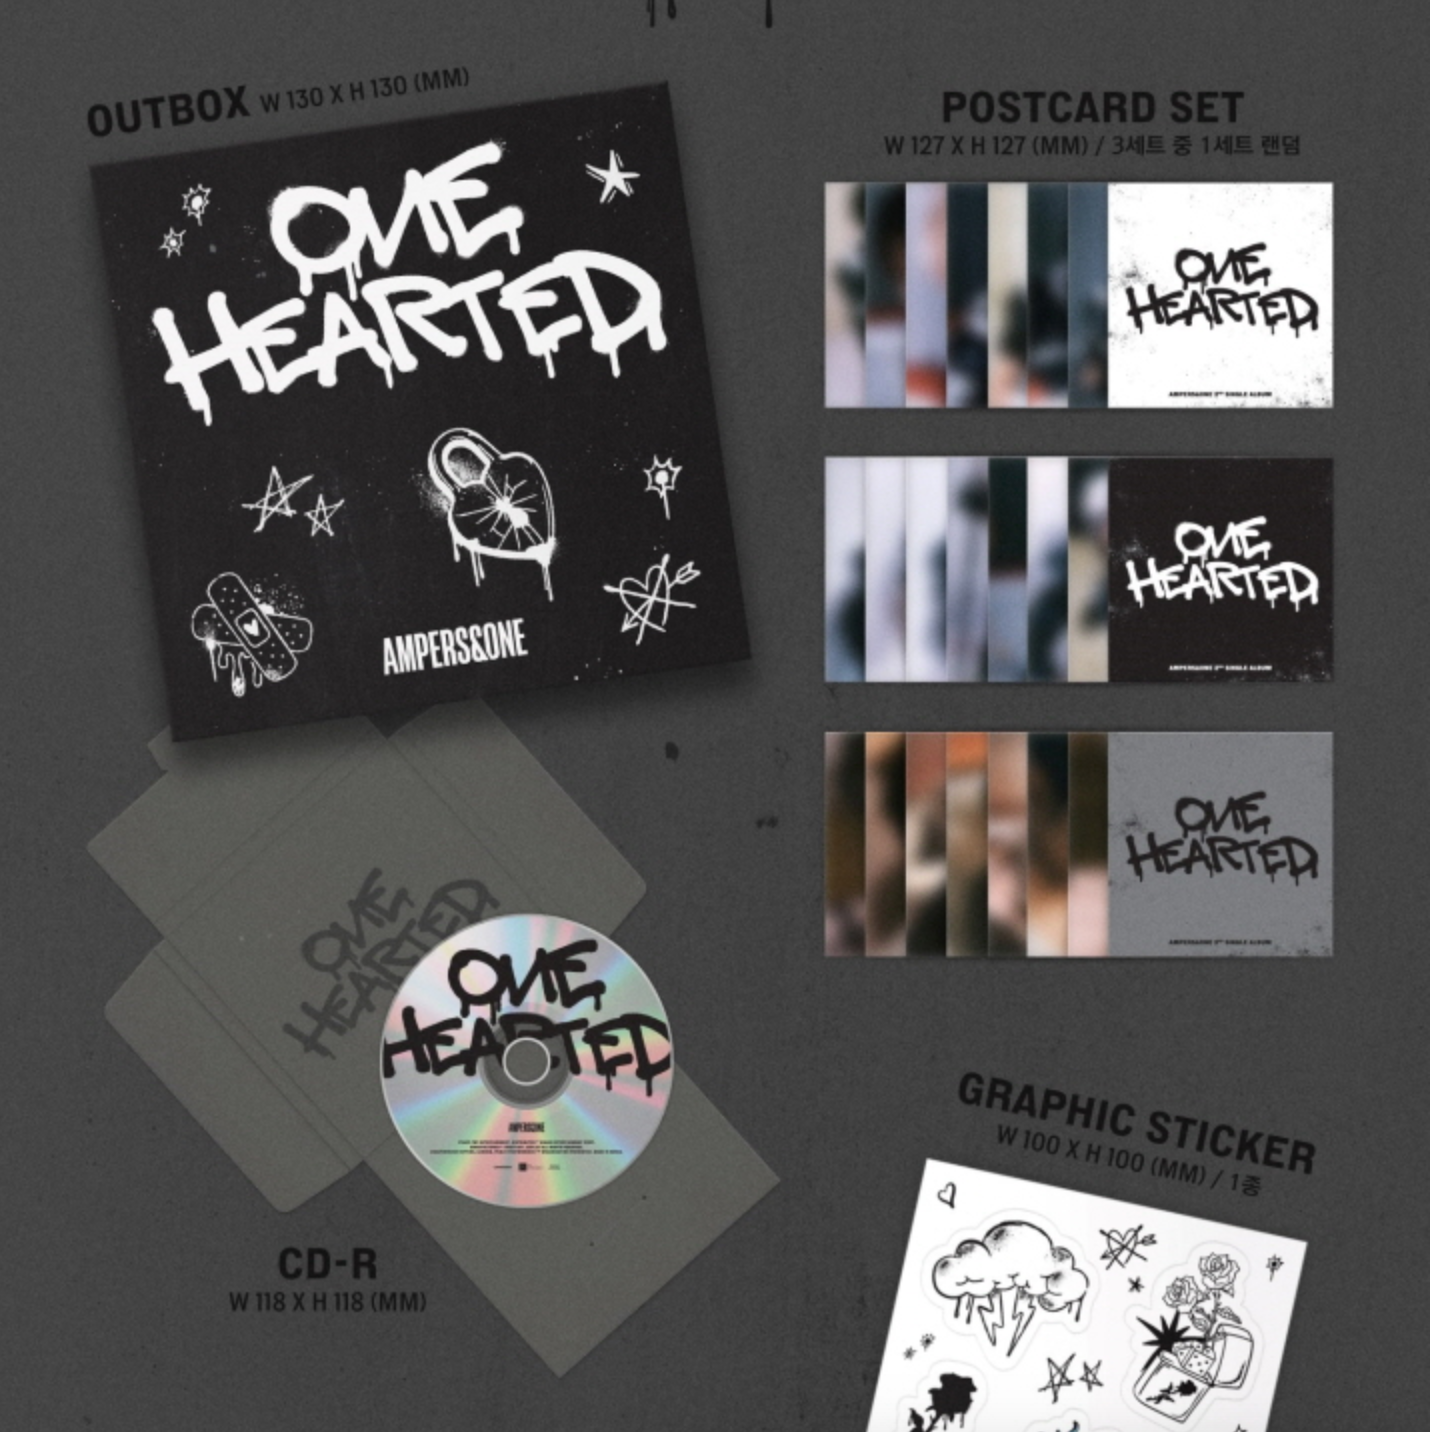 AMPERS&ONE - 2ND SINGLE ALBUM [ONE HEARTED] (POSTCARD VER.)